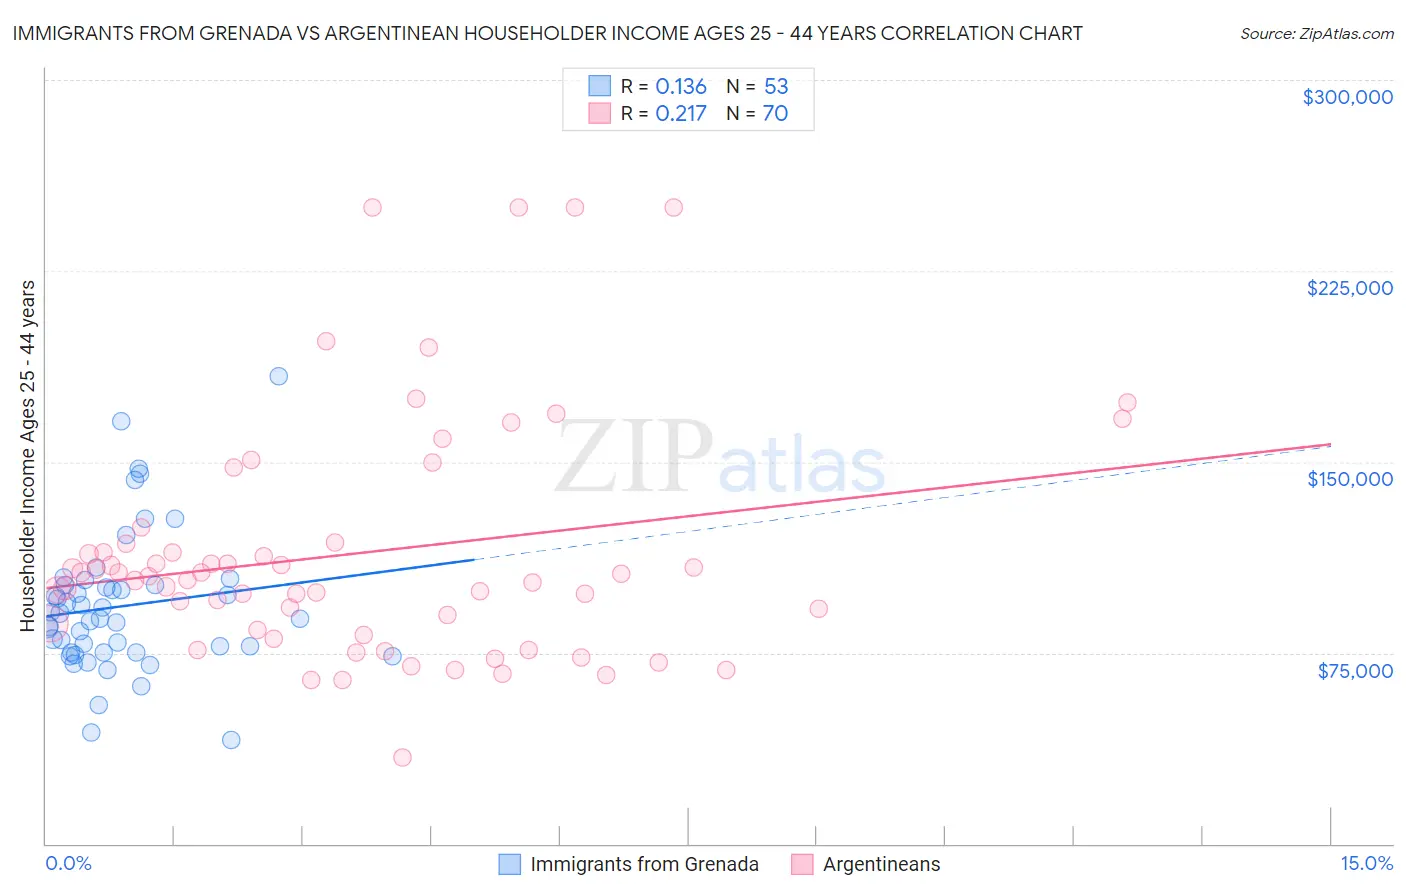 Immigrants from Grenada vs Argentinean Householder Income Ages 25 - 44 years